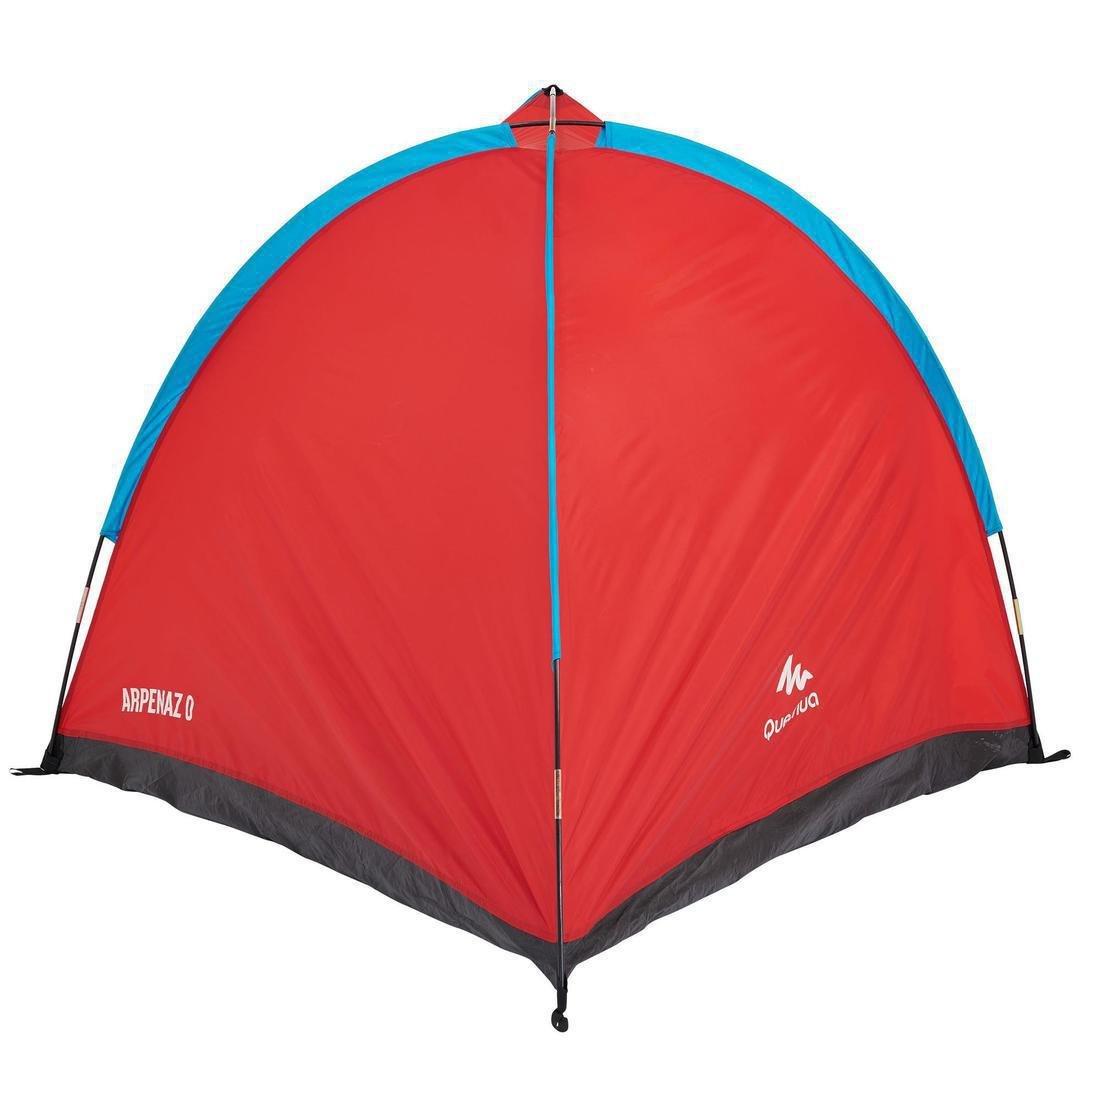 QUECHUA - Camping Shelter (With Tent Poles) Arpenaz 0 Compact - 1 Adult To 2 Children, Dark Petrol Blue